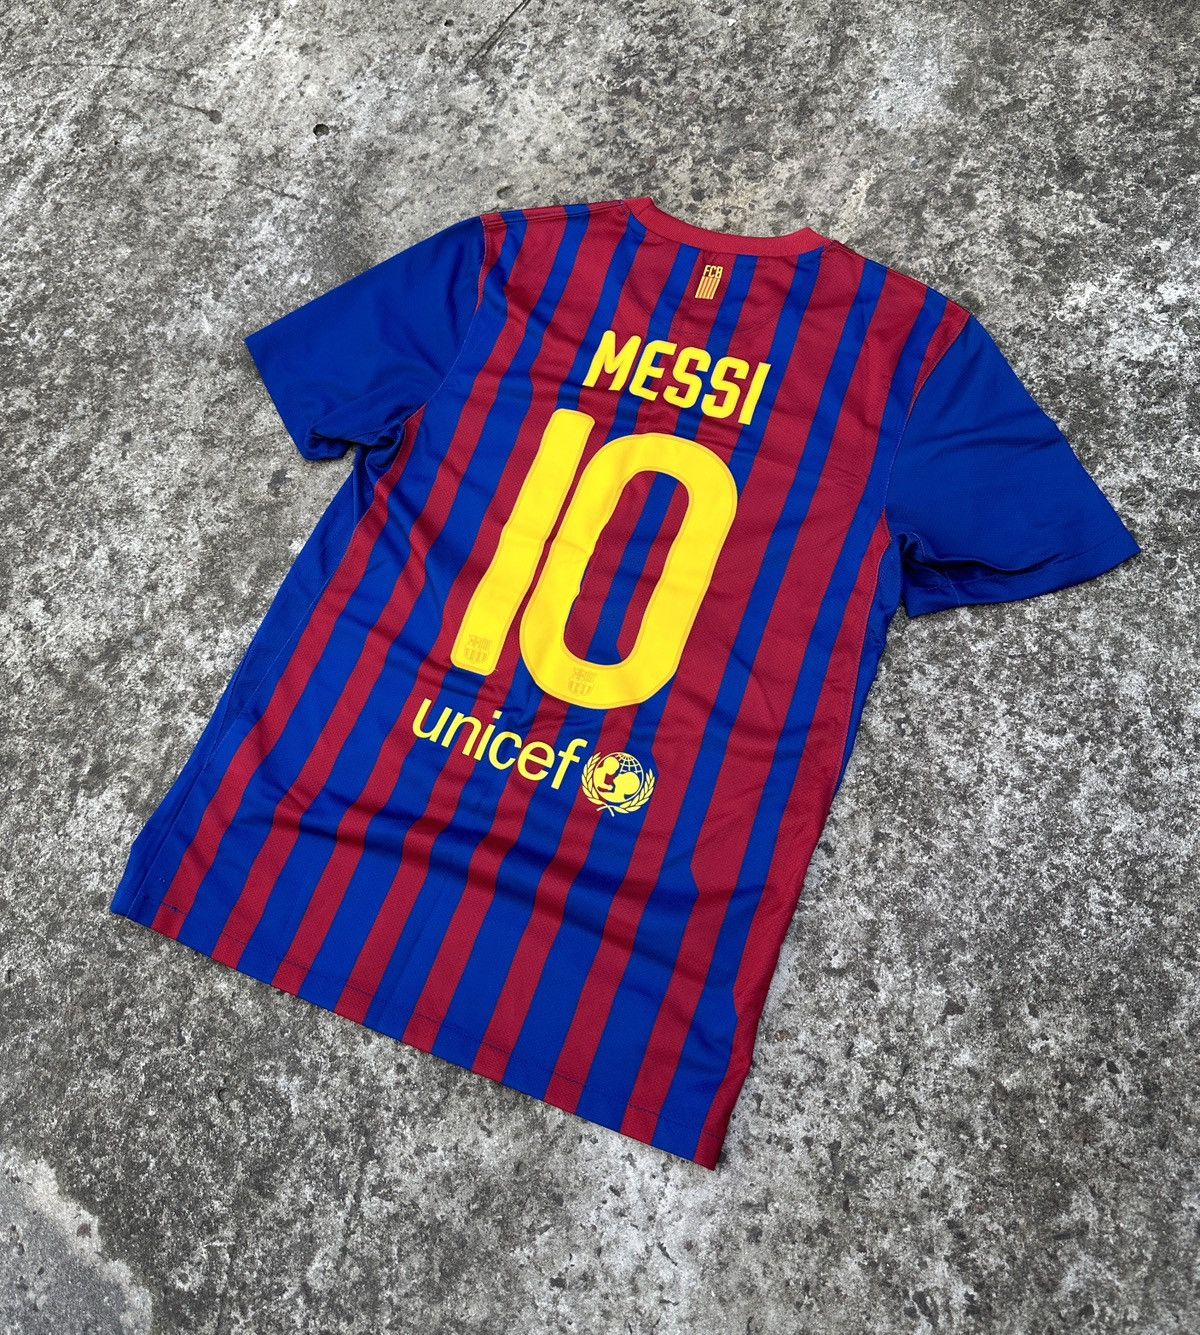 Pre-owned Nike X Soccer Jersey Vintage Nike F.c.barcelona 10 Messi Soccer Jersey Blokecore In Blue/red